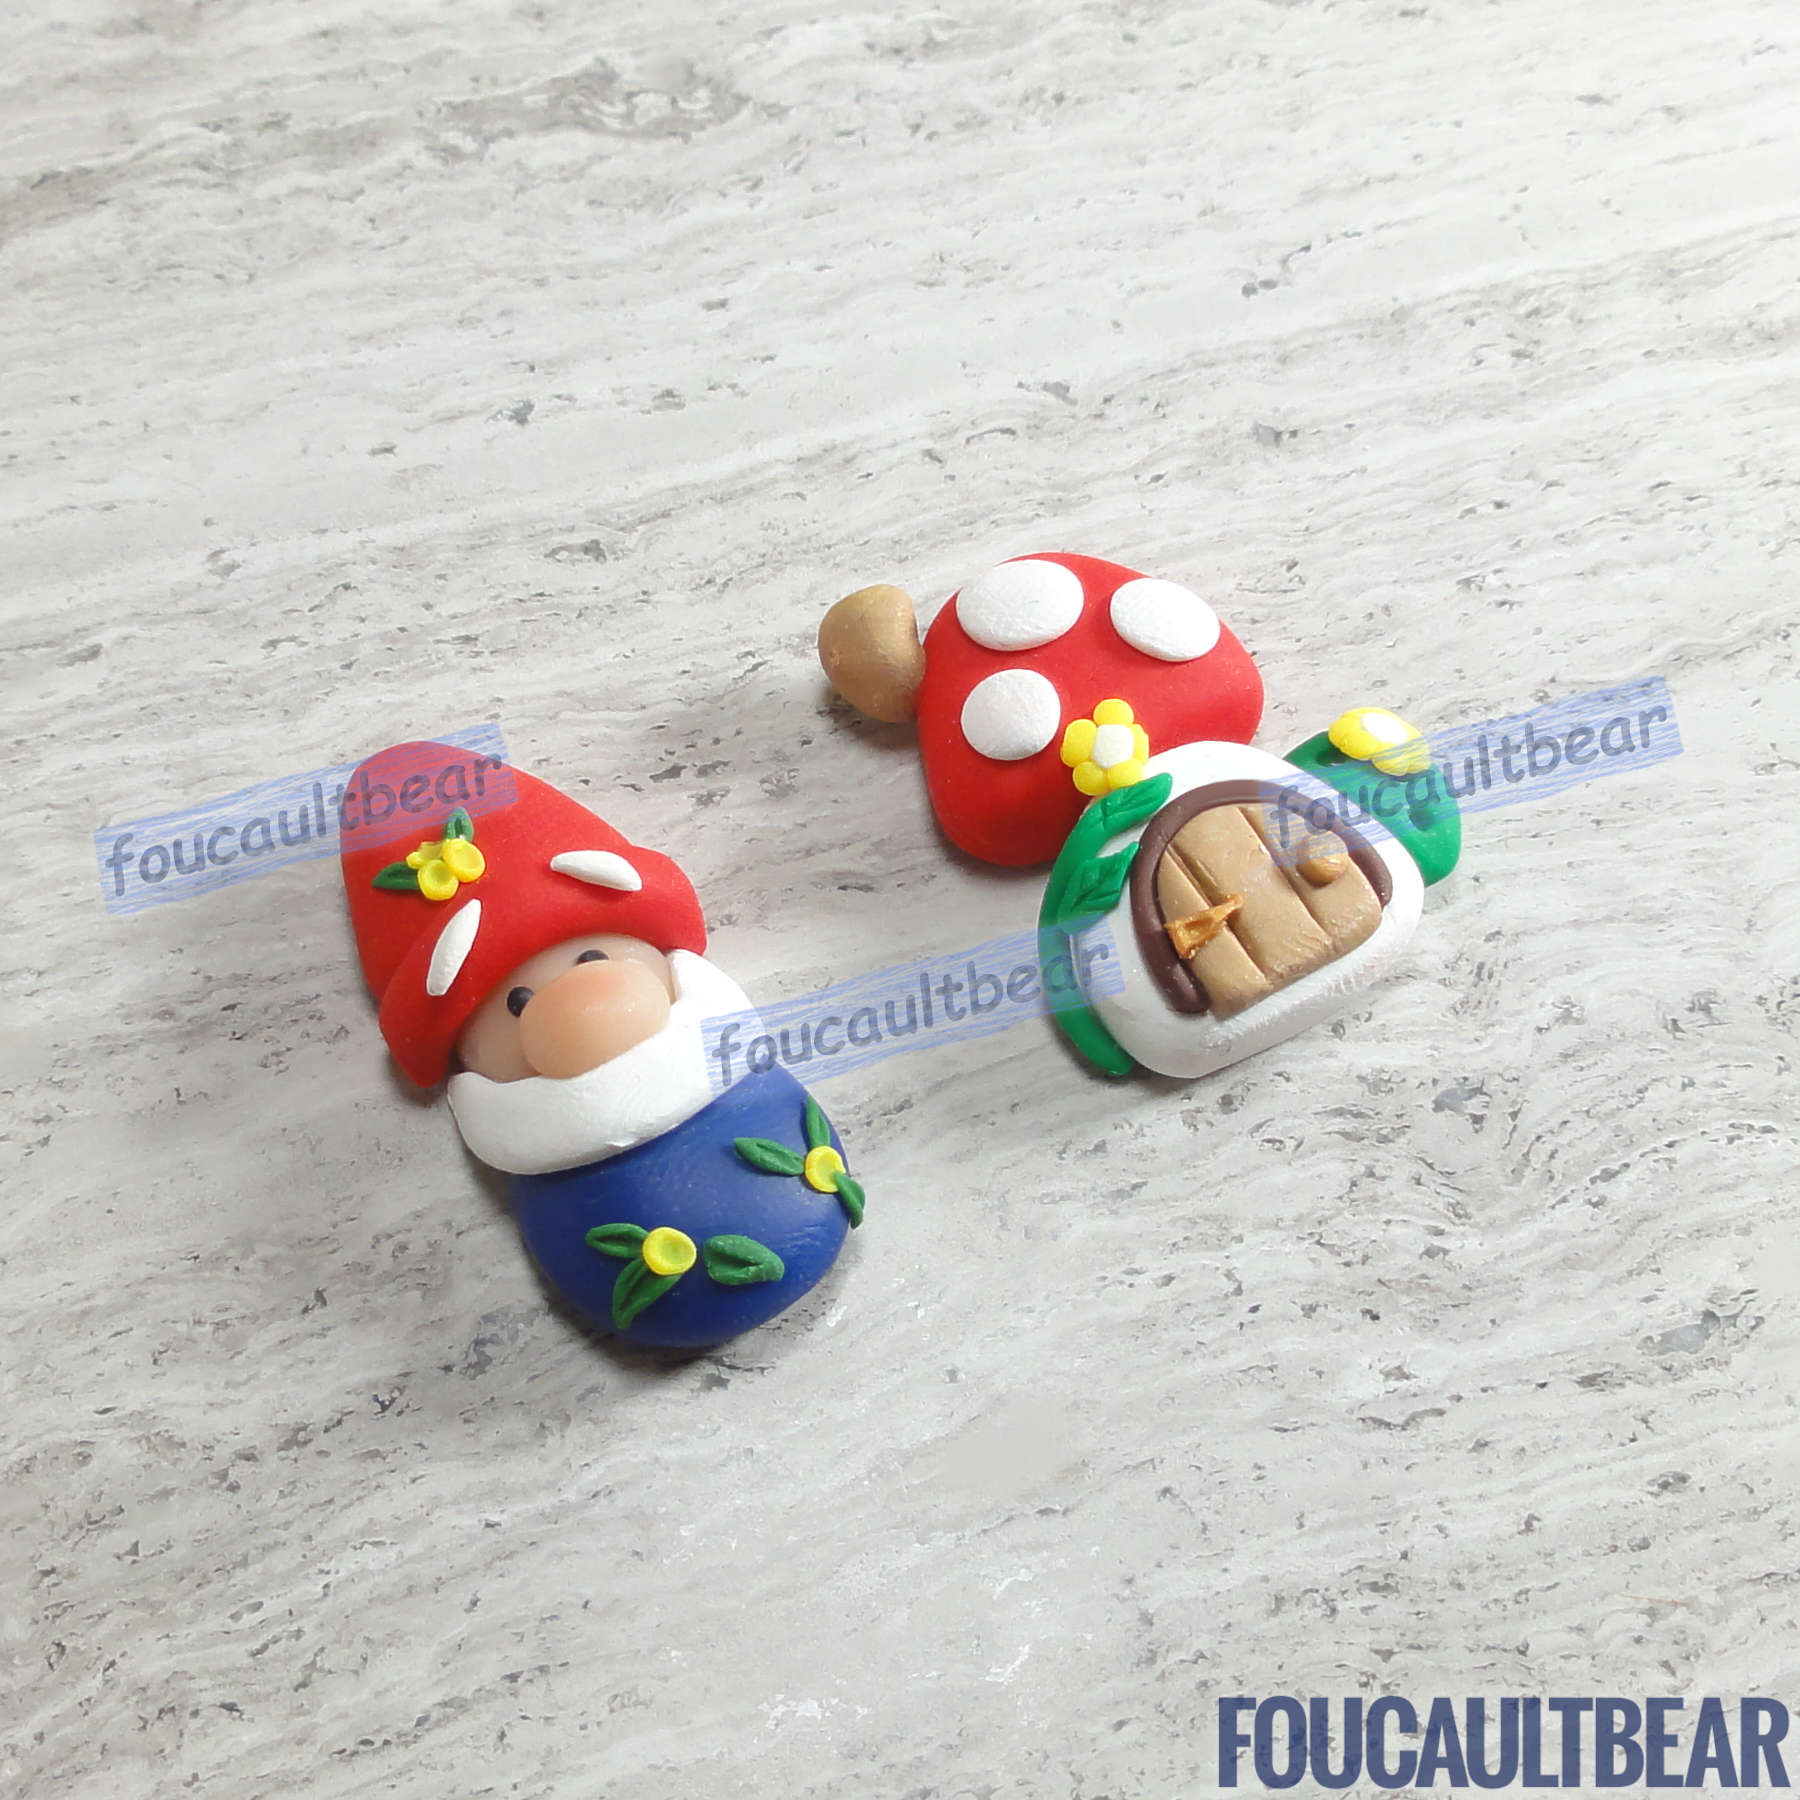 Foucaultbear's HANDMADE CLAY ART FLATBACK. Gnome or Mushroom House, or Set of 2. Handmade Polymer Clay Art. For Your Own Creative Use, such as on Hair Bow Barrette Clips, Picture Frames and Refrigerator Magnets. This flatback Clay Garden/Holiday Gnome or Mushroom House makes for perfect hair centerpieces. Bought as a set, the gnome turns into a garden gnome with his summer mushroom home. Used individually on a ponytail, it can also turn into a holiday gnome with its vibrant holiday colors. 